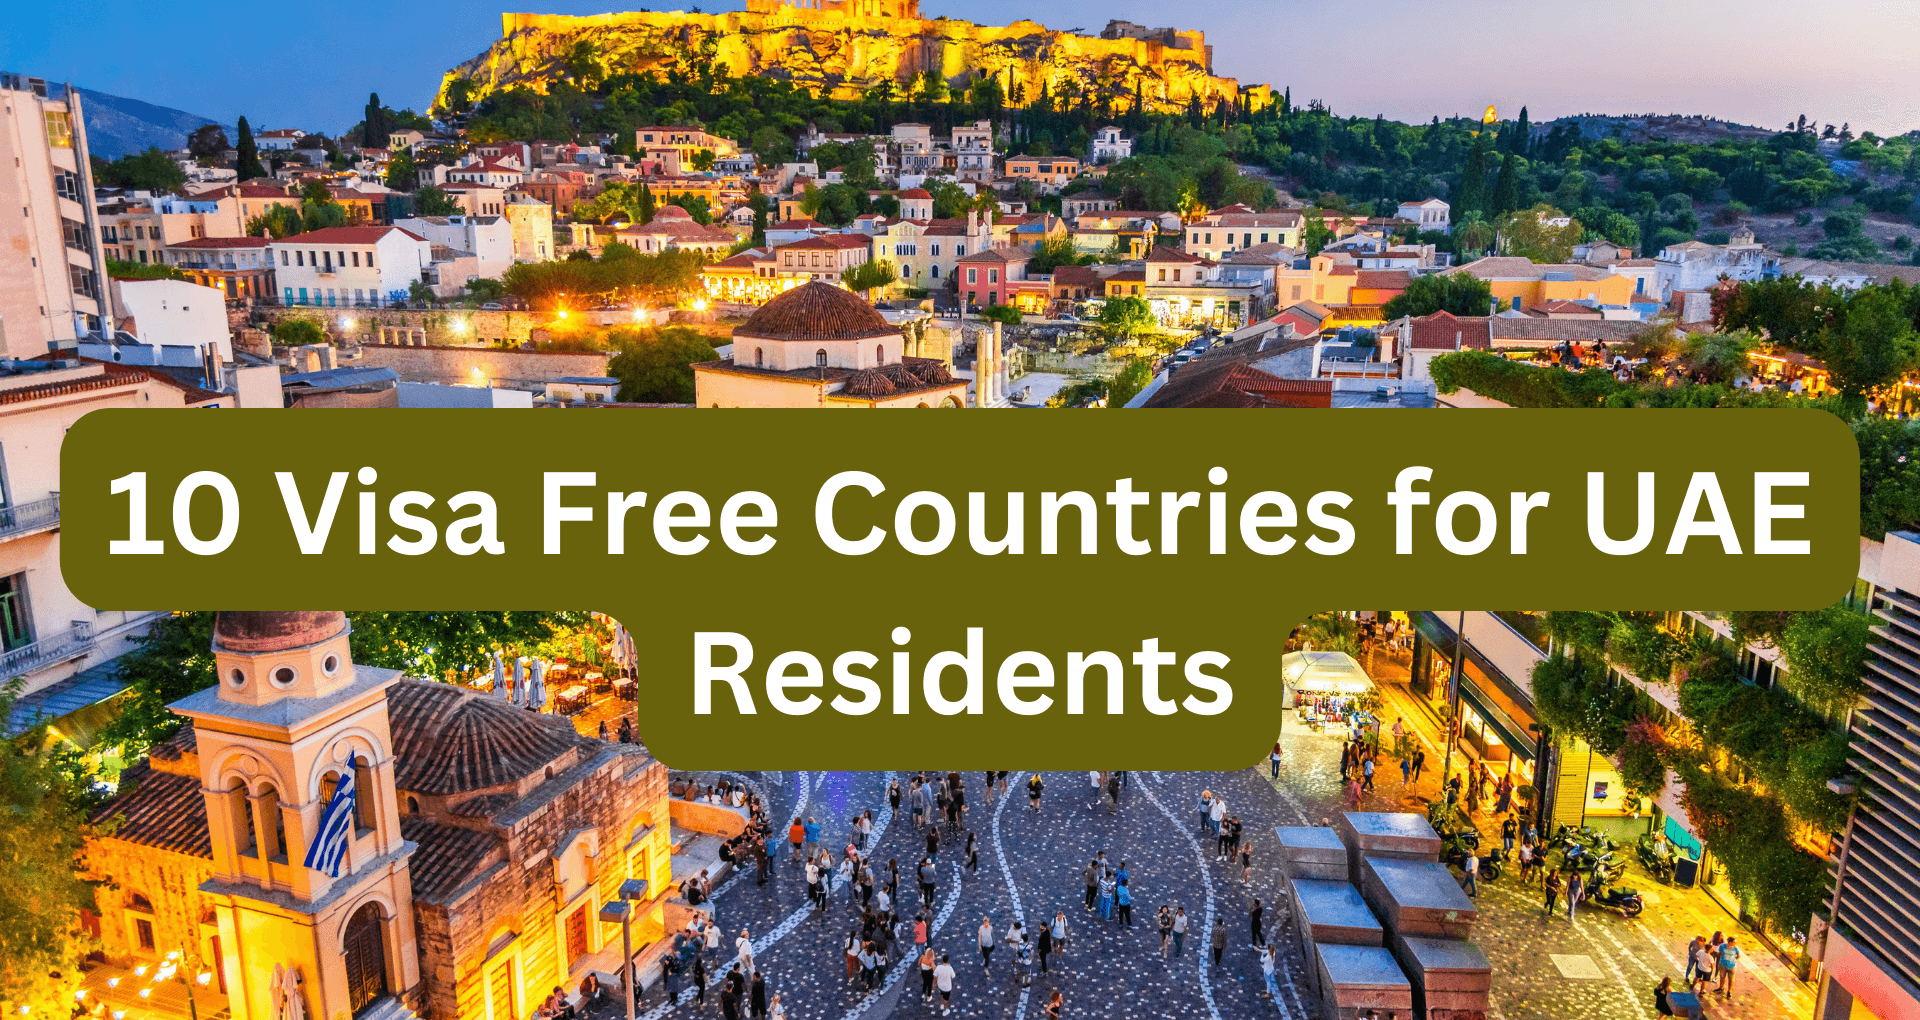 10 Visa-Free Countries for UAE Residents